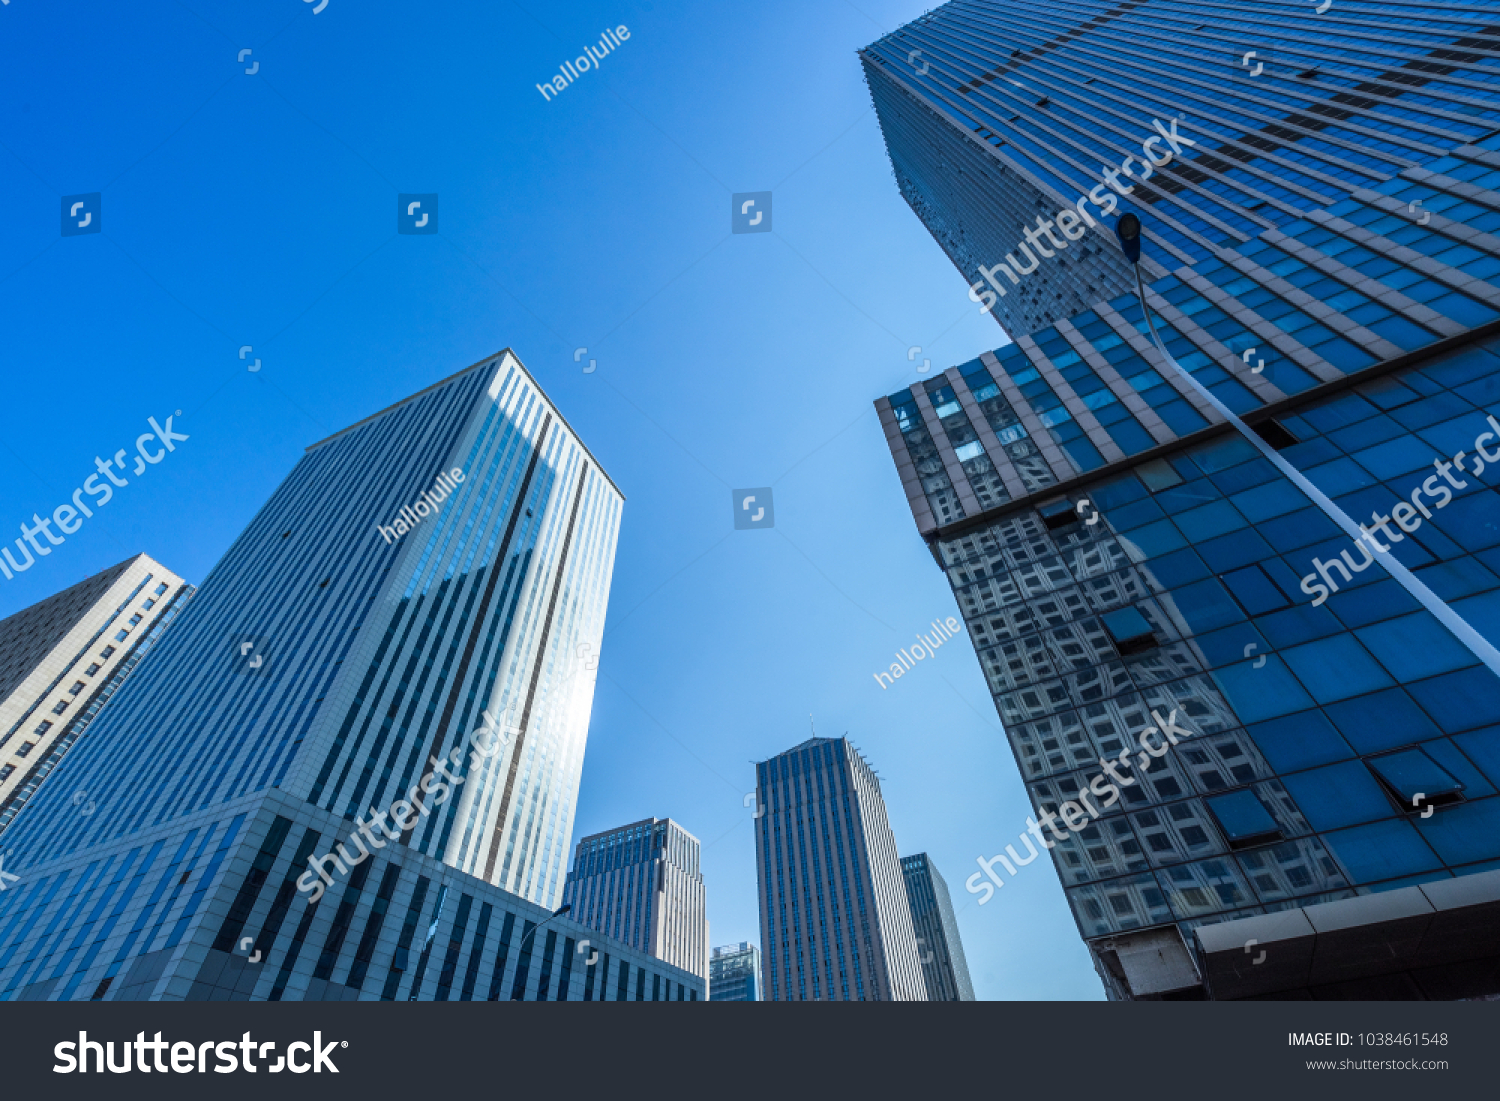 low angle view of skyscrapers in city of China
 #1038461548